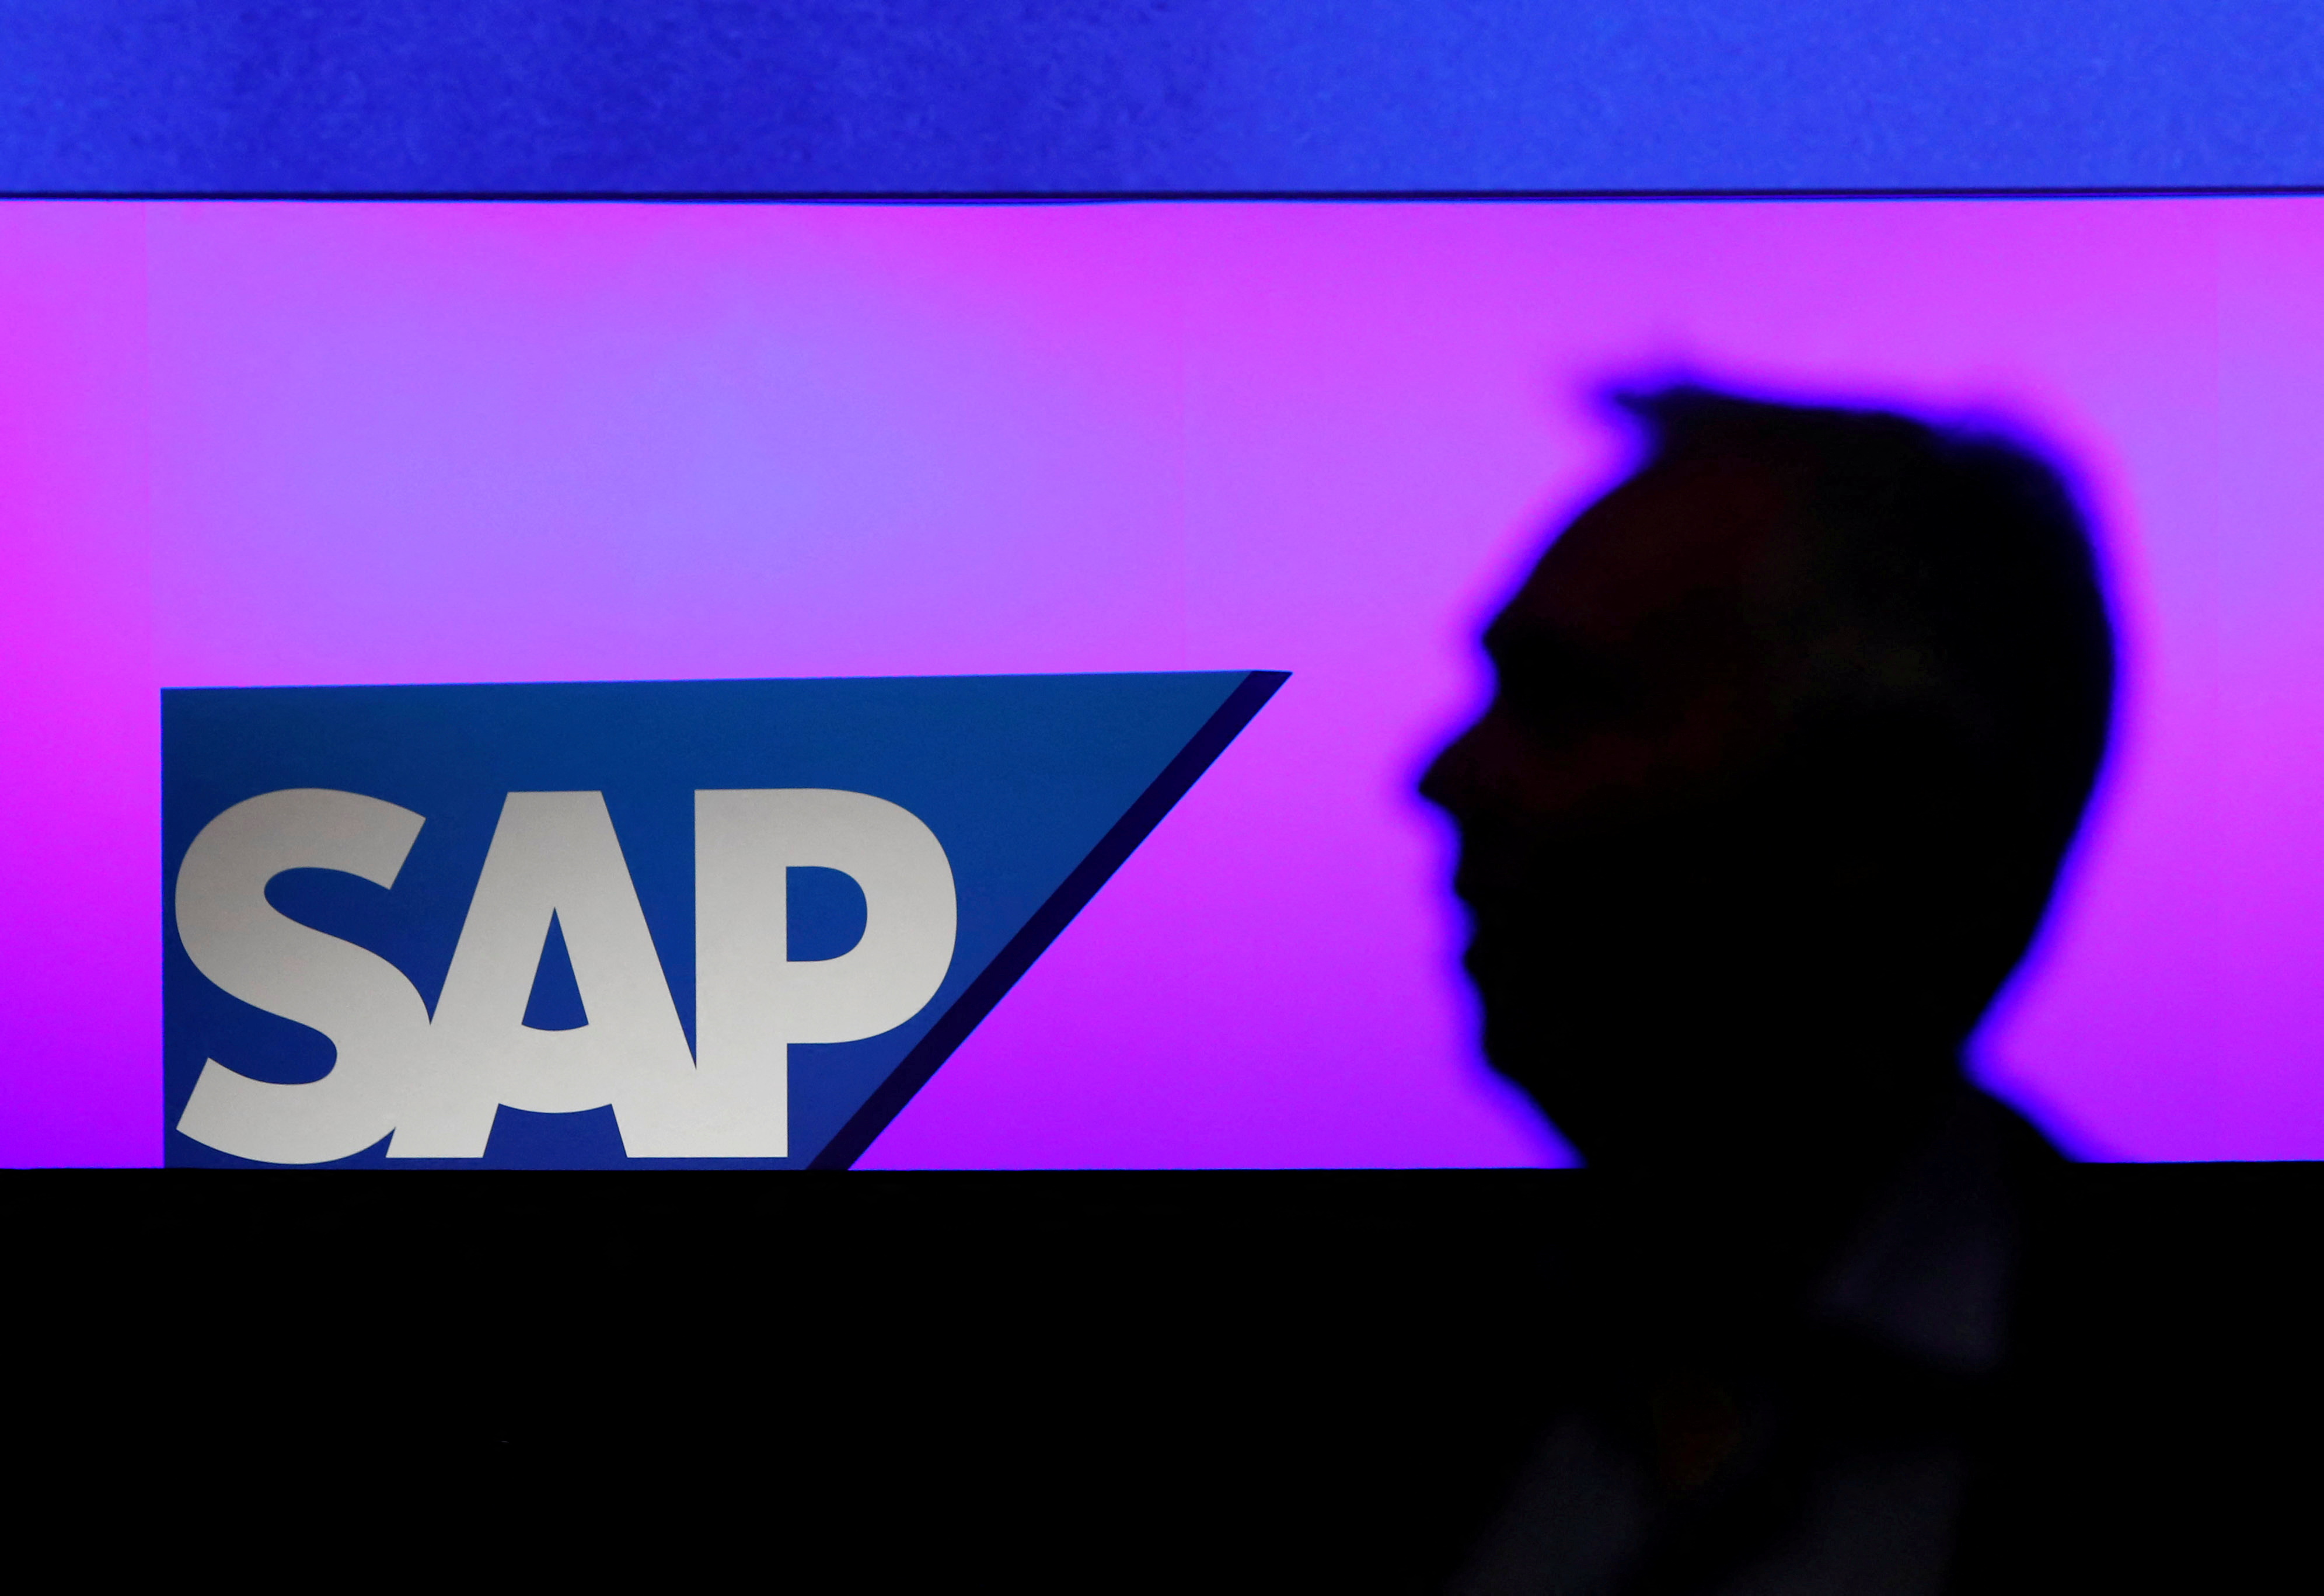 SAP holds annual general meeting in Mannheim